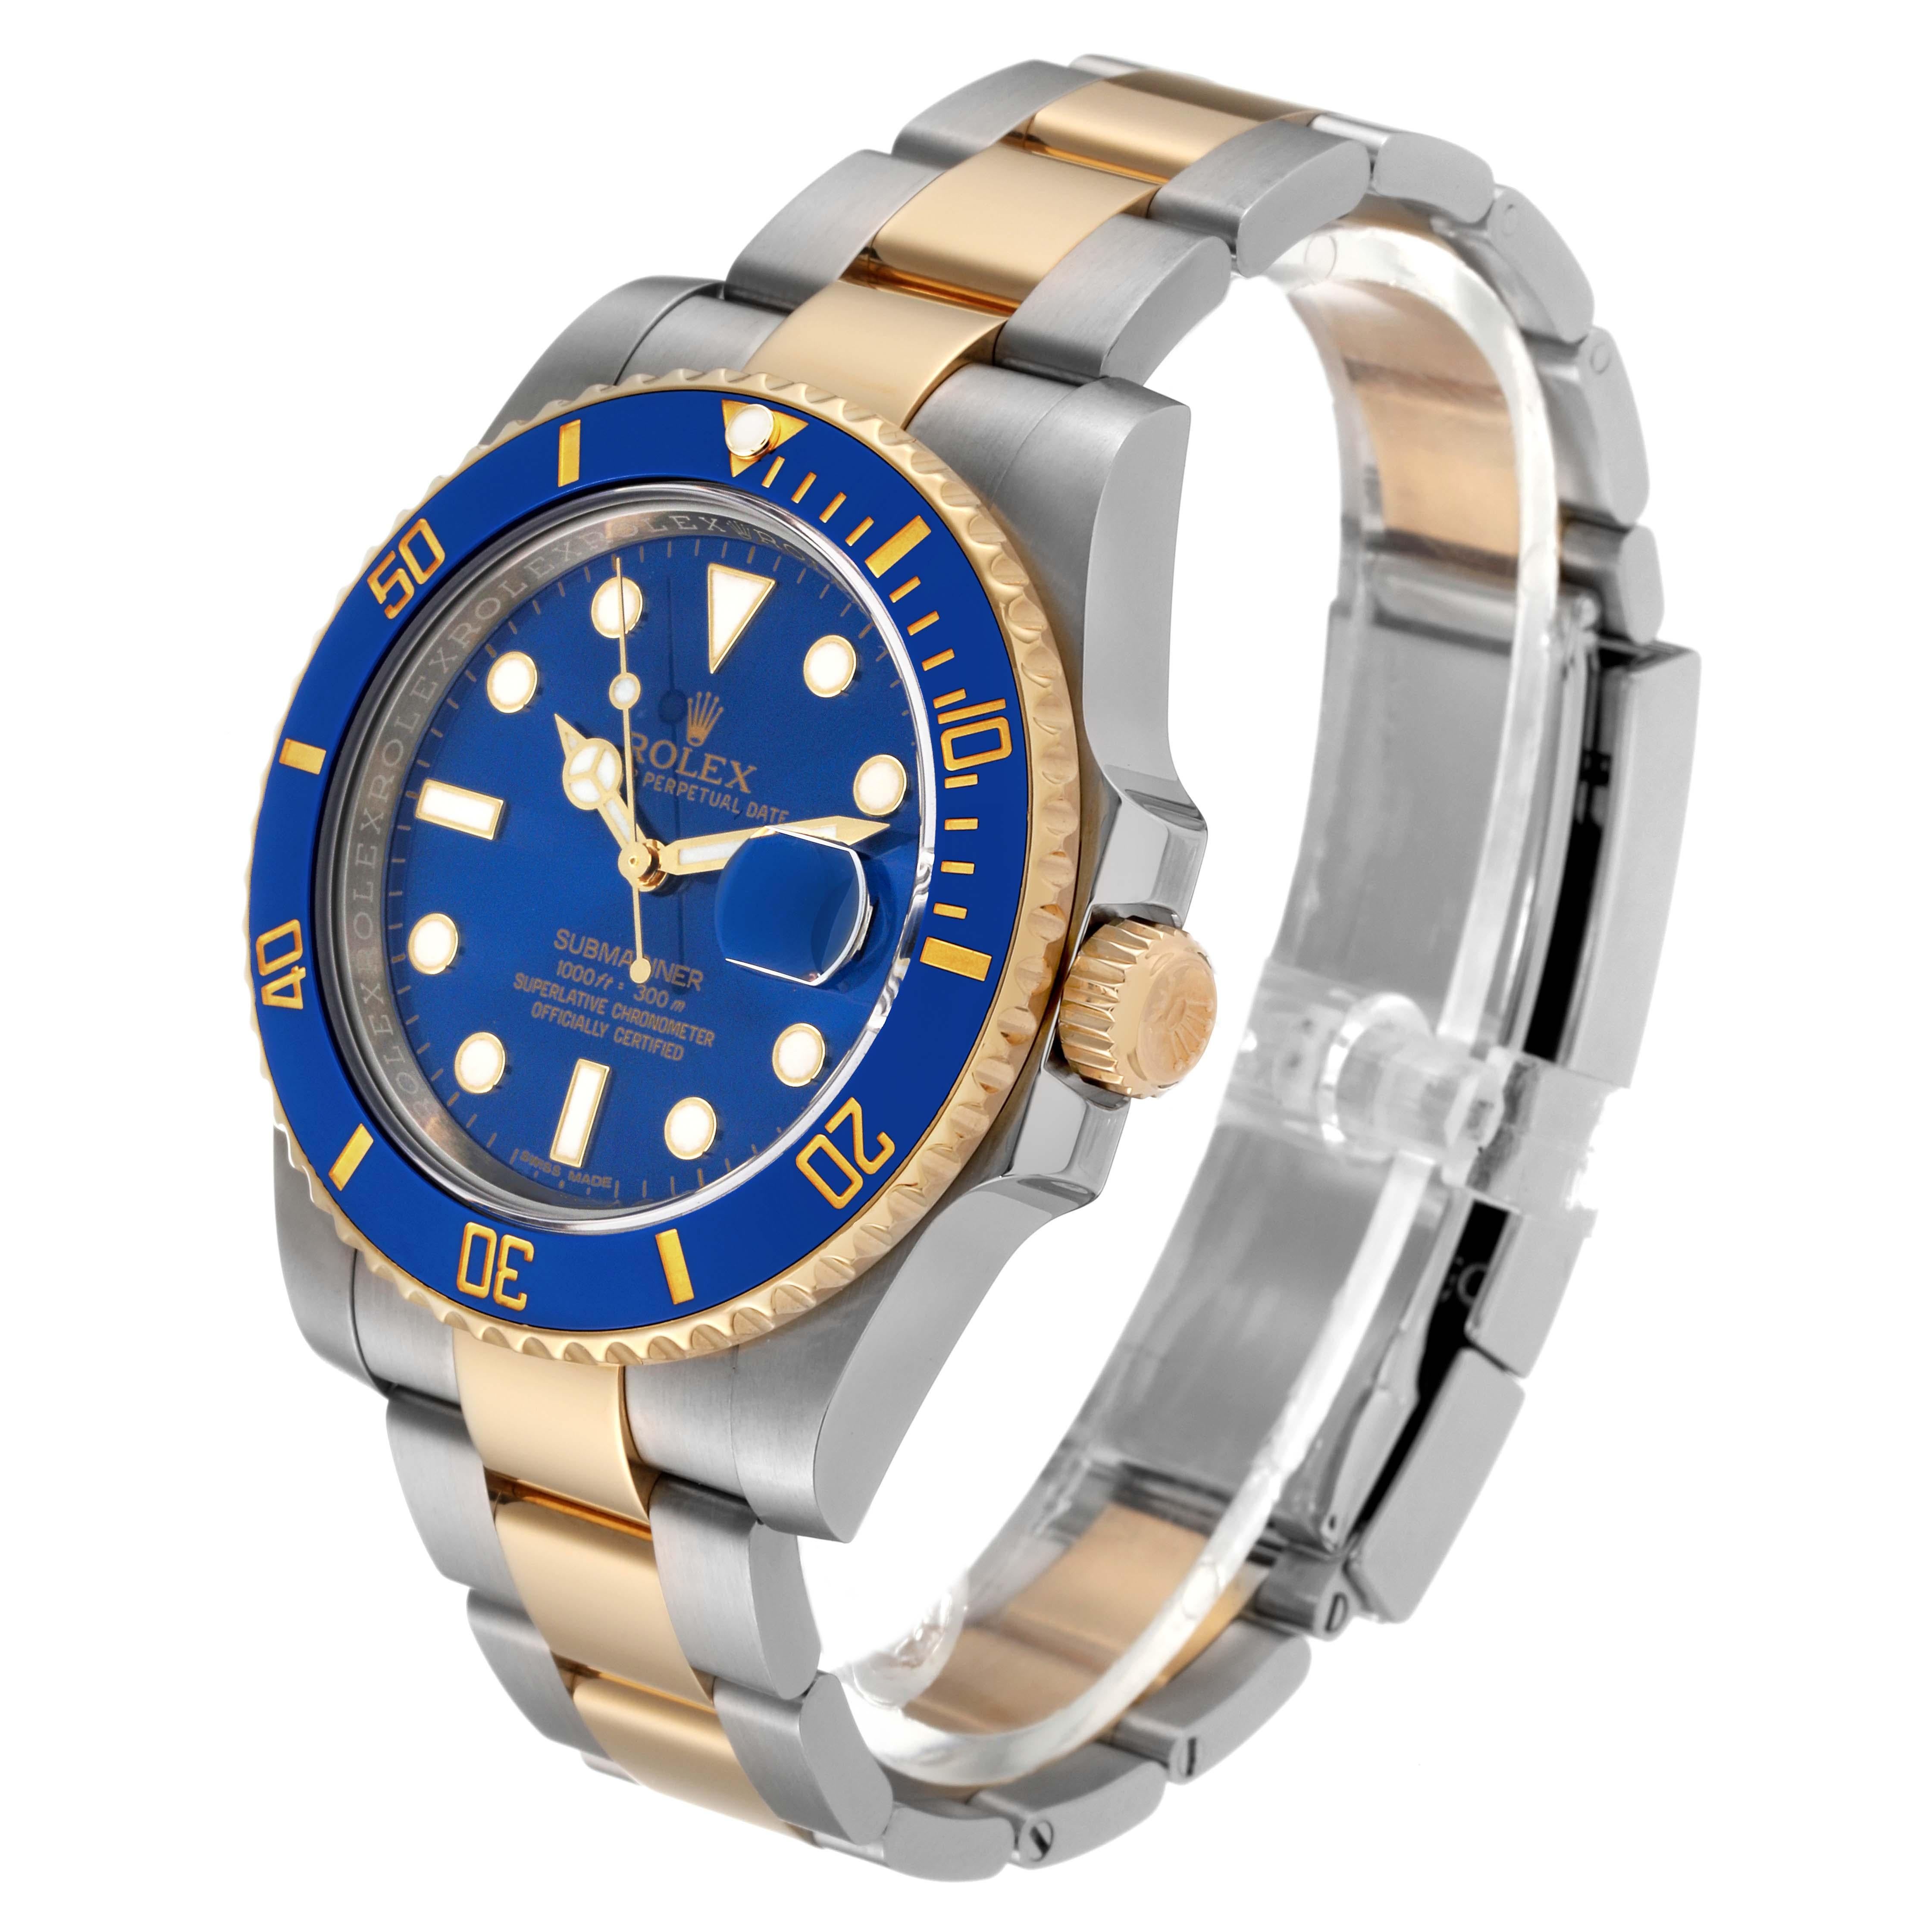 Rolex Submariner Steel Yellow Gold Blue Dial Mens Watch 116613 Box Card 5